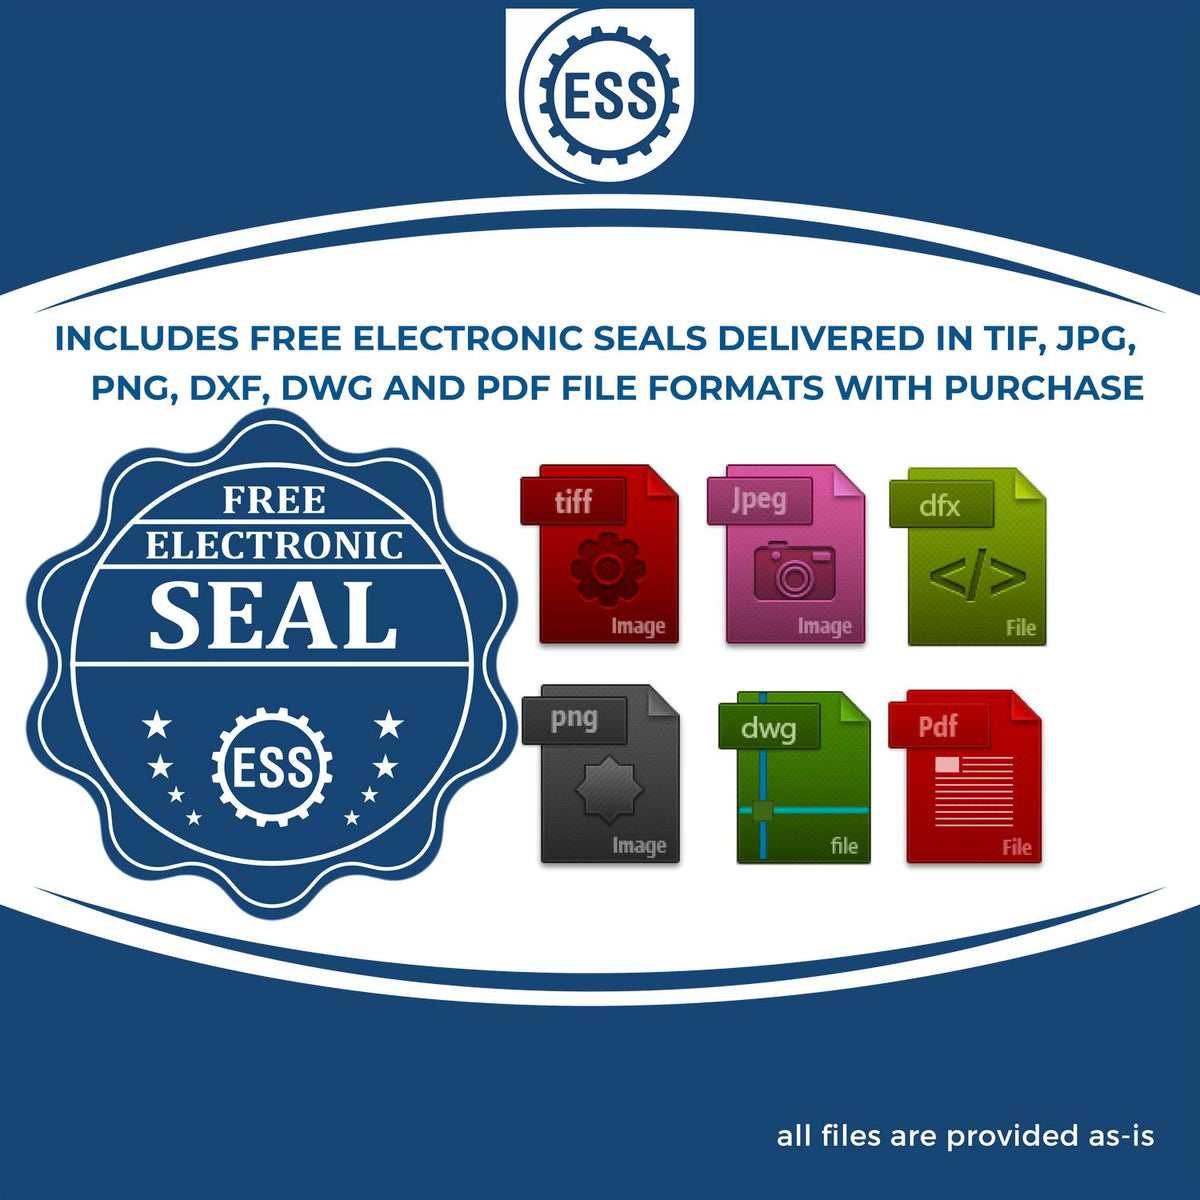 An infographic for the free electronic seal for the Wisconsin Professional Geologist Seal Stamp illustrating the different file type icons such as DXF, DWG, TIF, JPG and PNG.